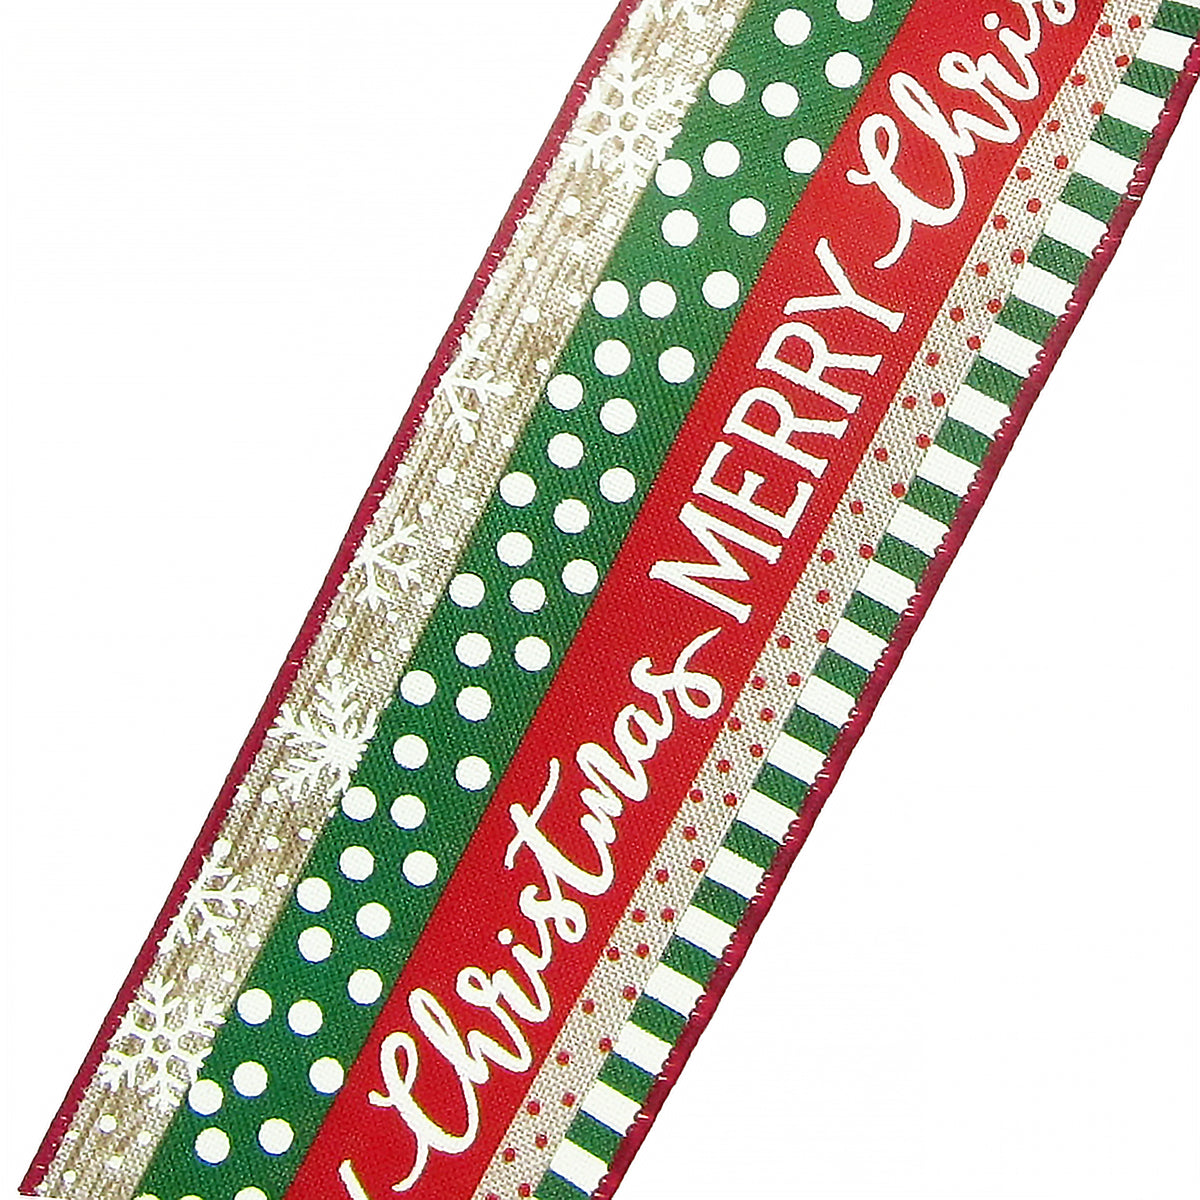 Wired Red & Green Stripes Merry Christmas Ribbon #40 - 2.5W x 10Yards